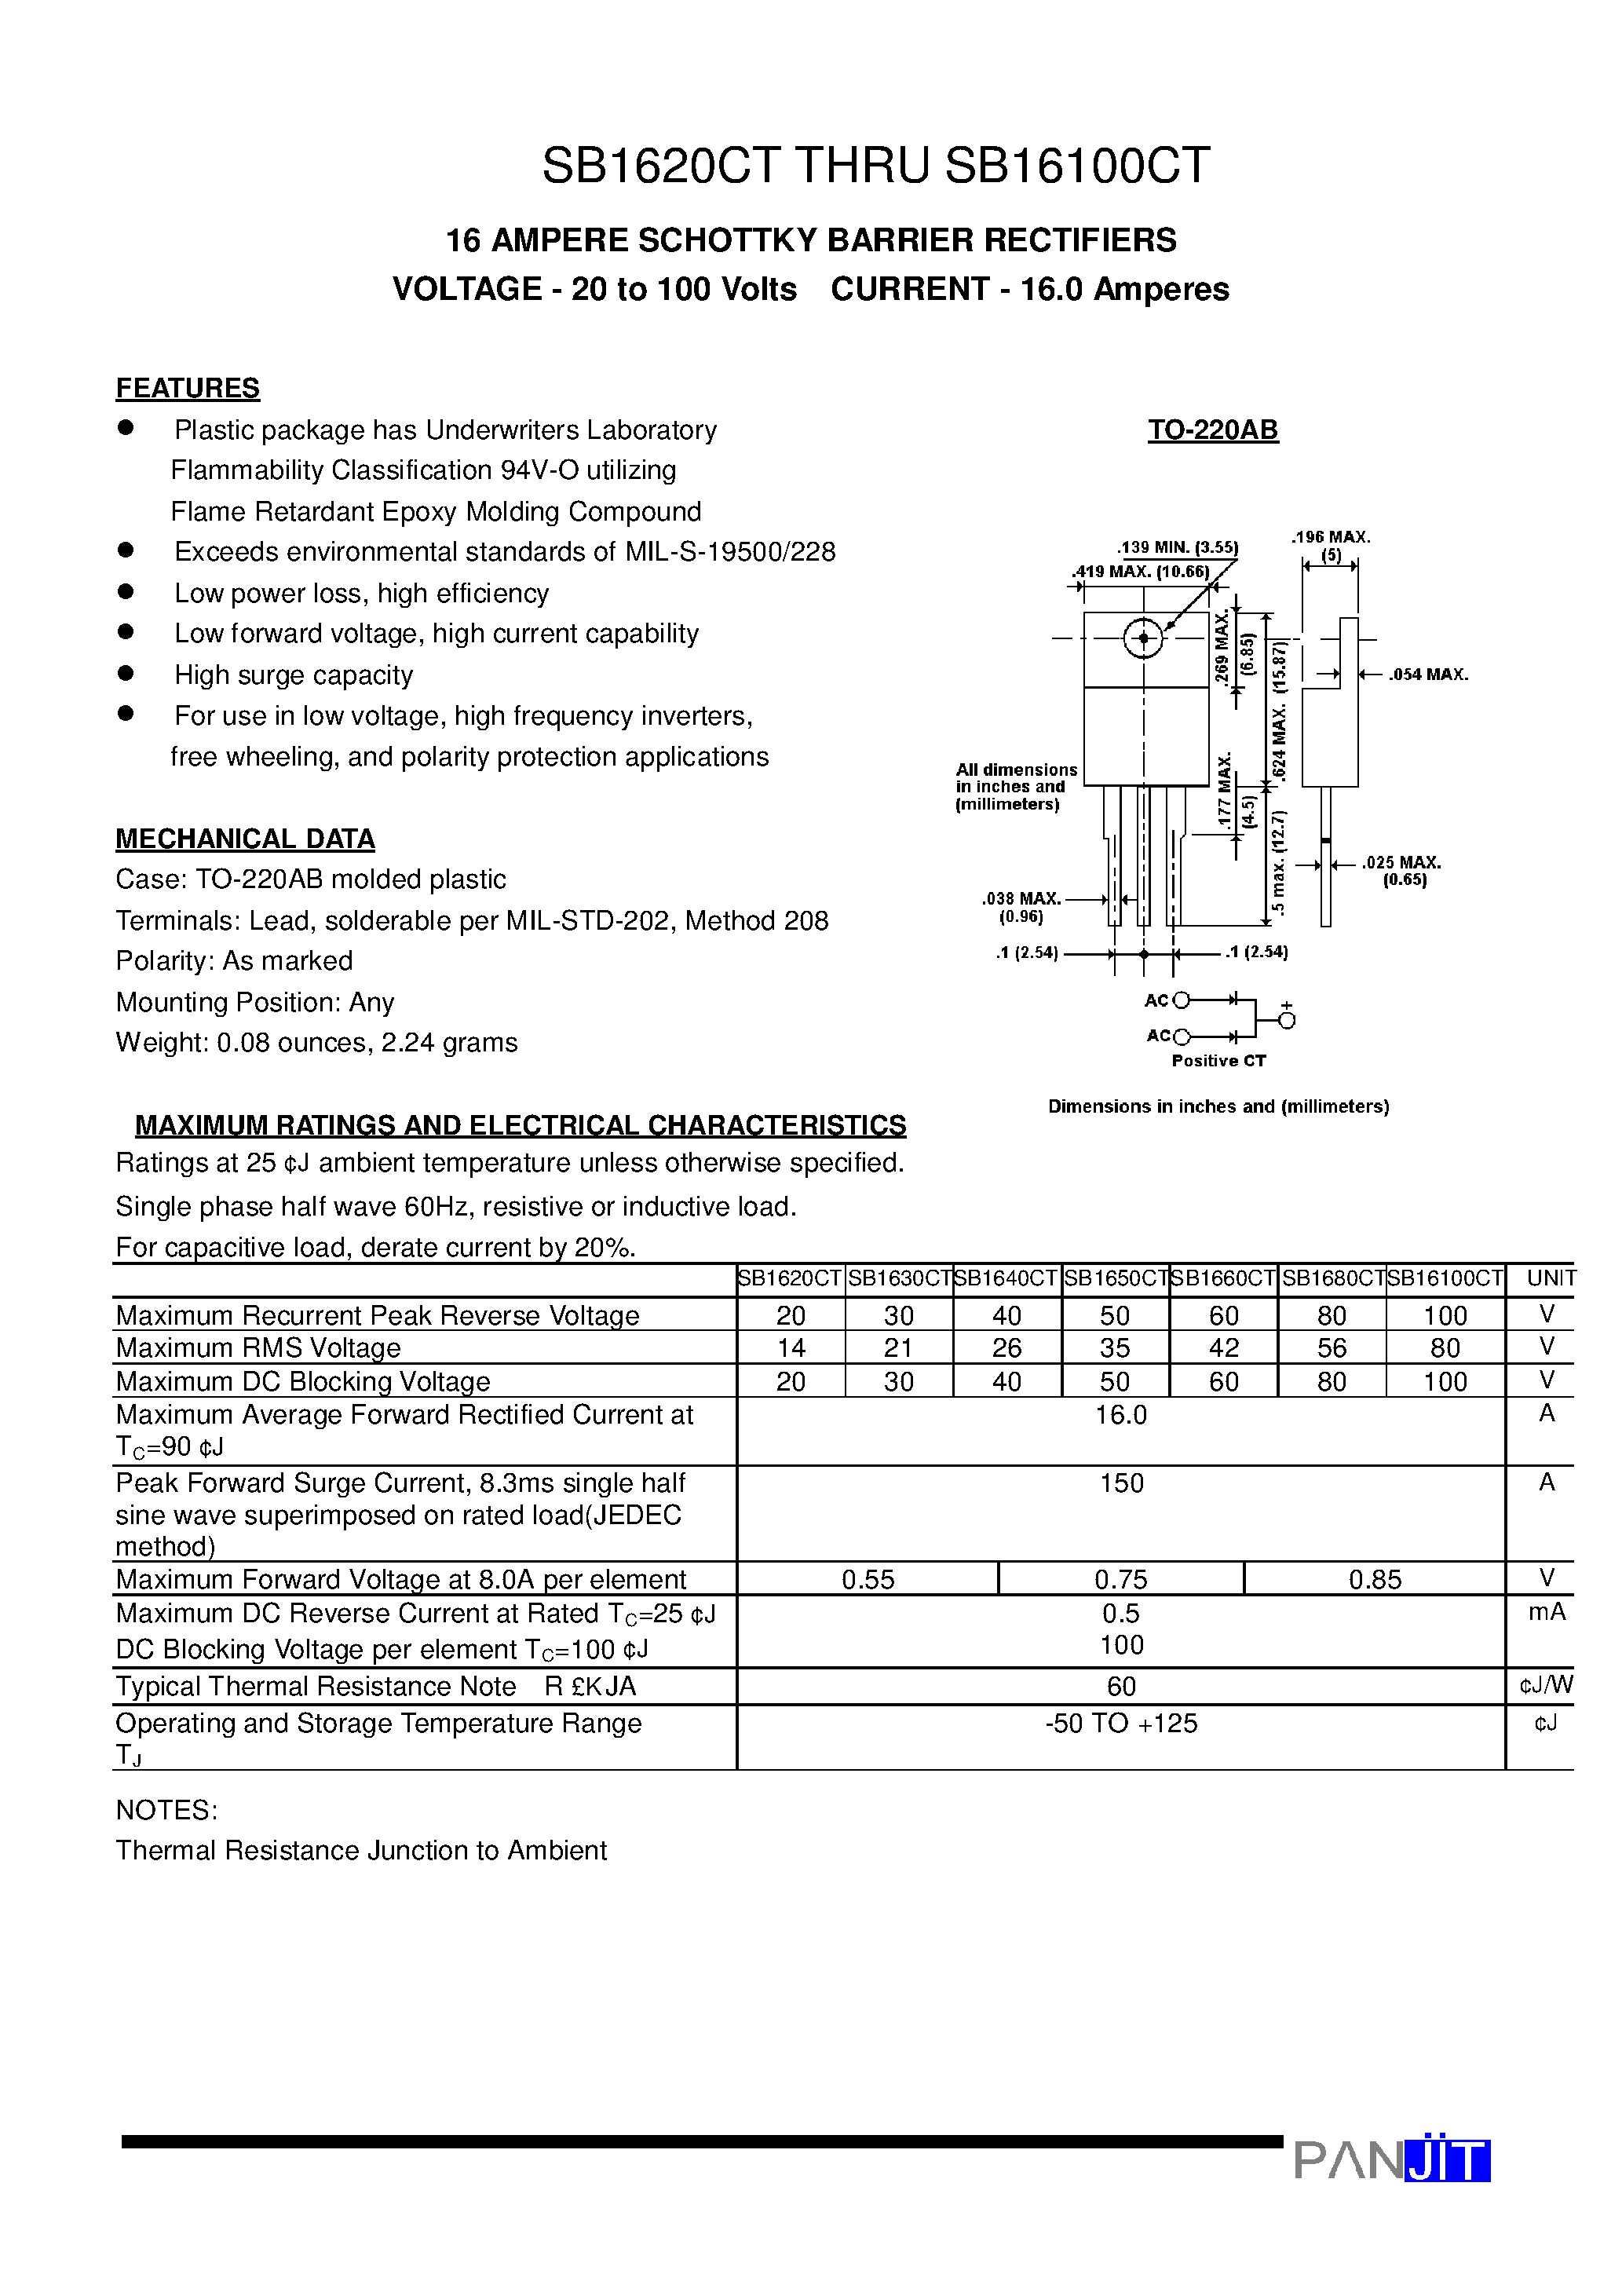 Datasheet SB1650CT - 16 AMPERE SCHOTTKY BARRIER RECTIFIERS(VOLTAGE - 20 to 100 Volts CURRENT - 16.0 Amperes) page 1